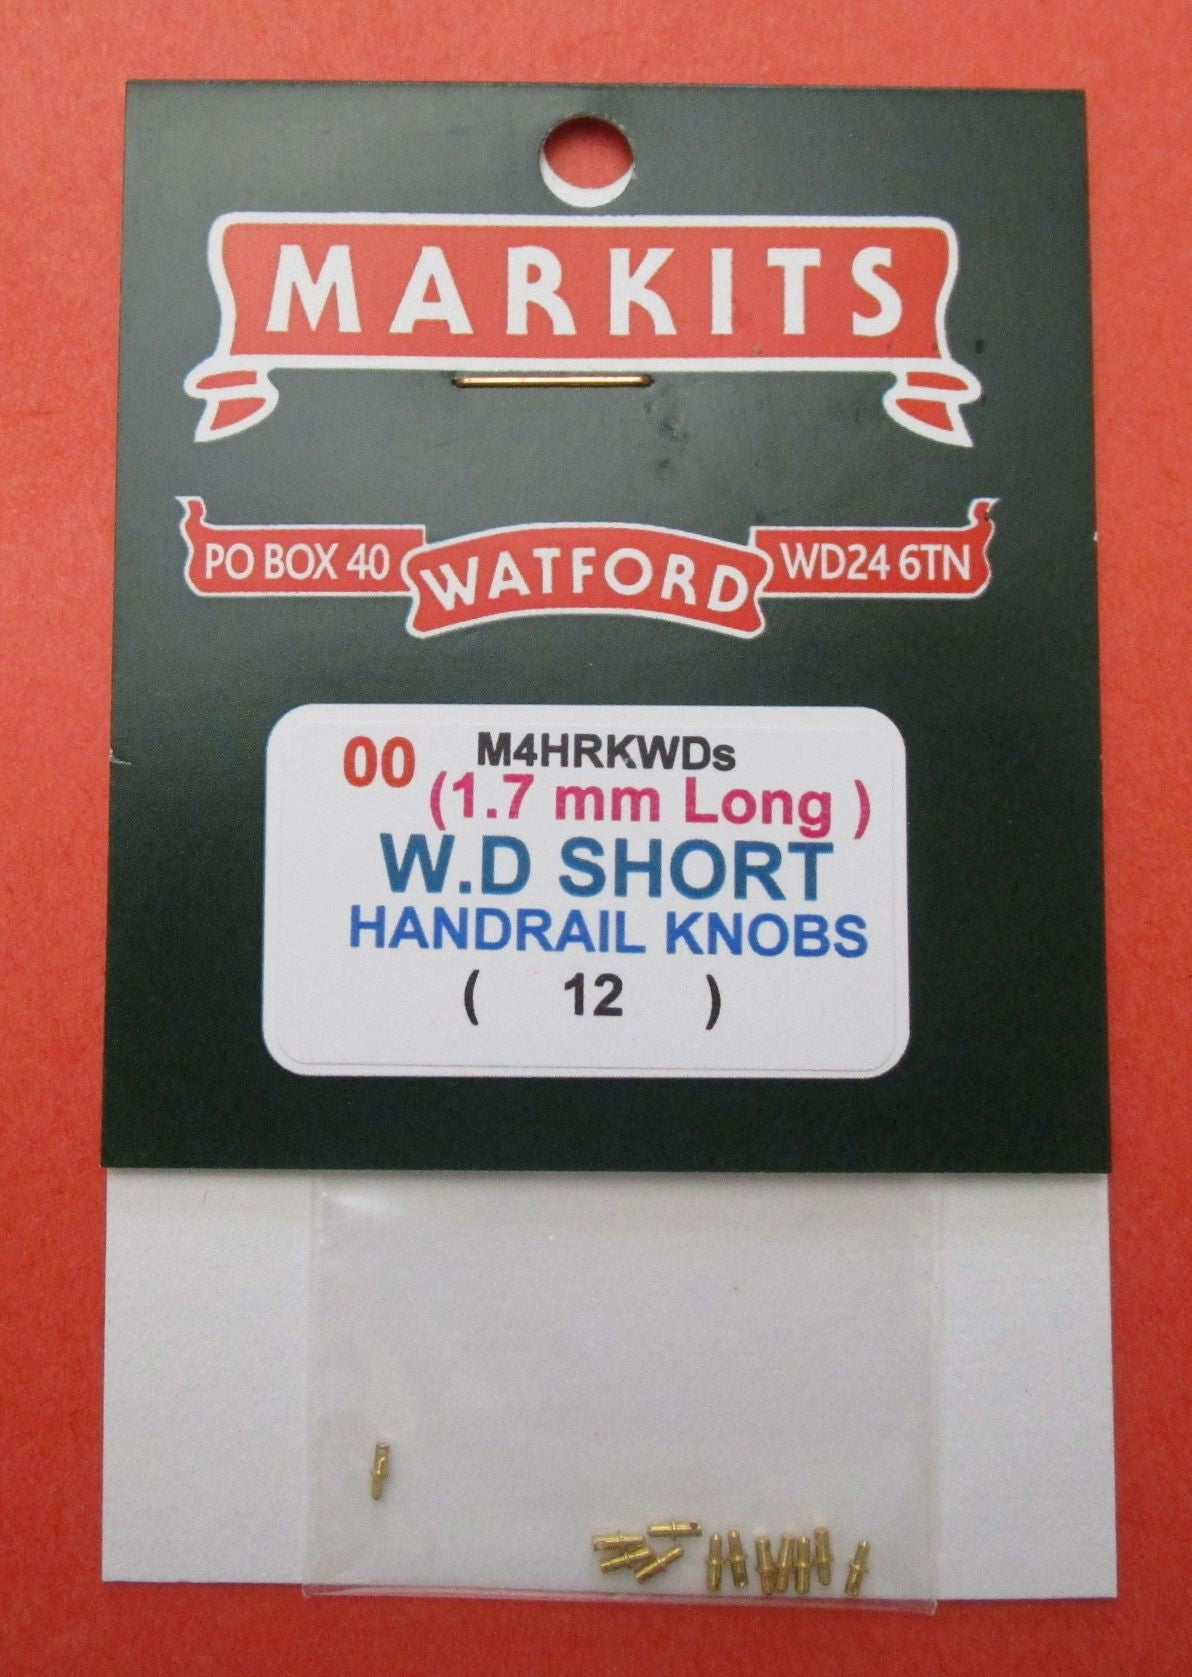 M4HRKWDS MARKITS WD Handrail Knobs Short (1mm x 1.7mm long) Pack of 12